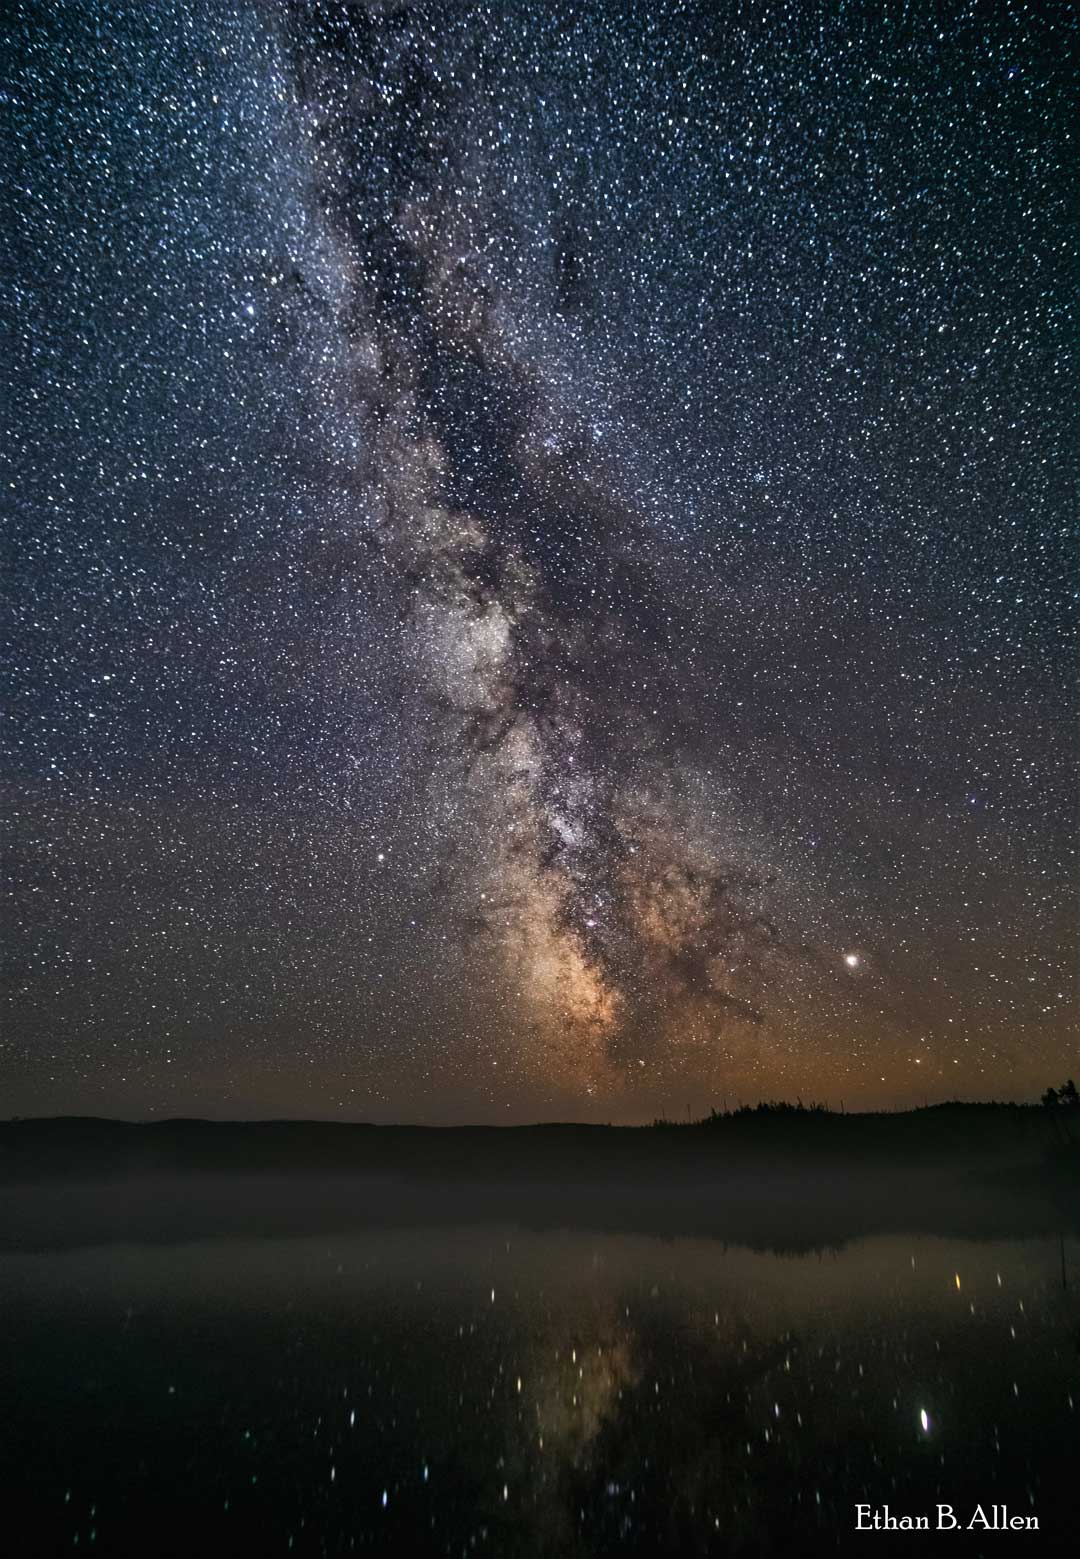 Milky Way over the BWCAW